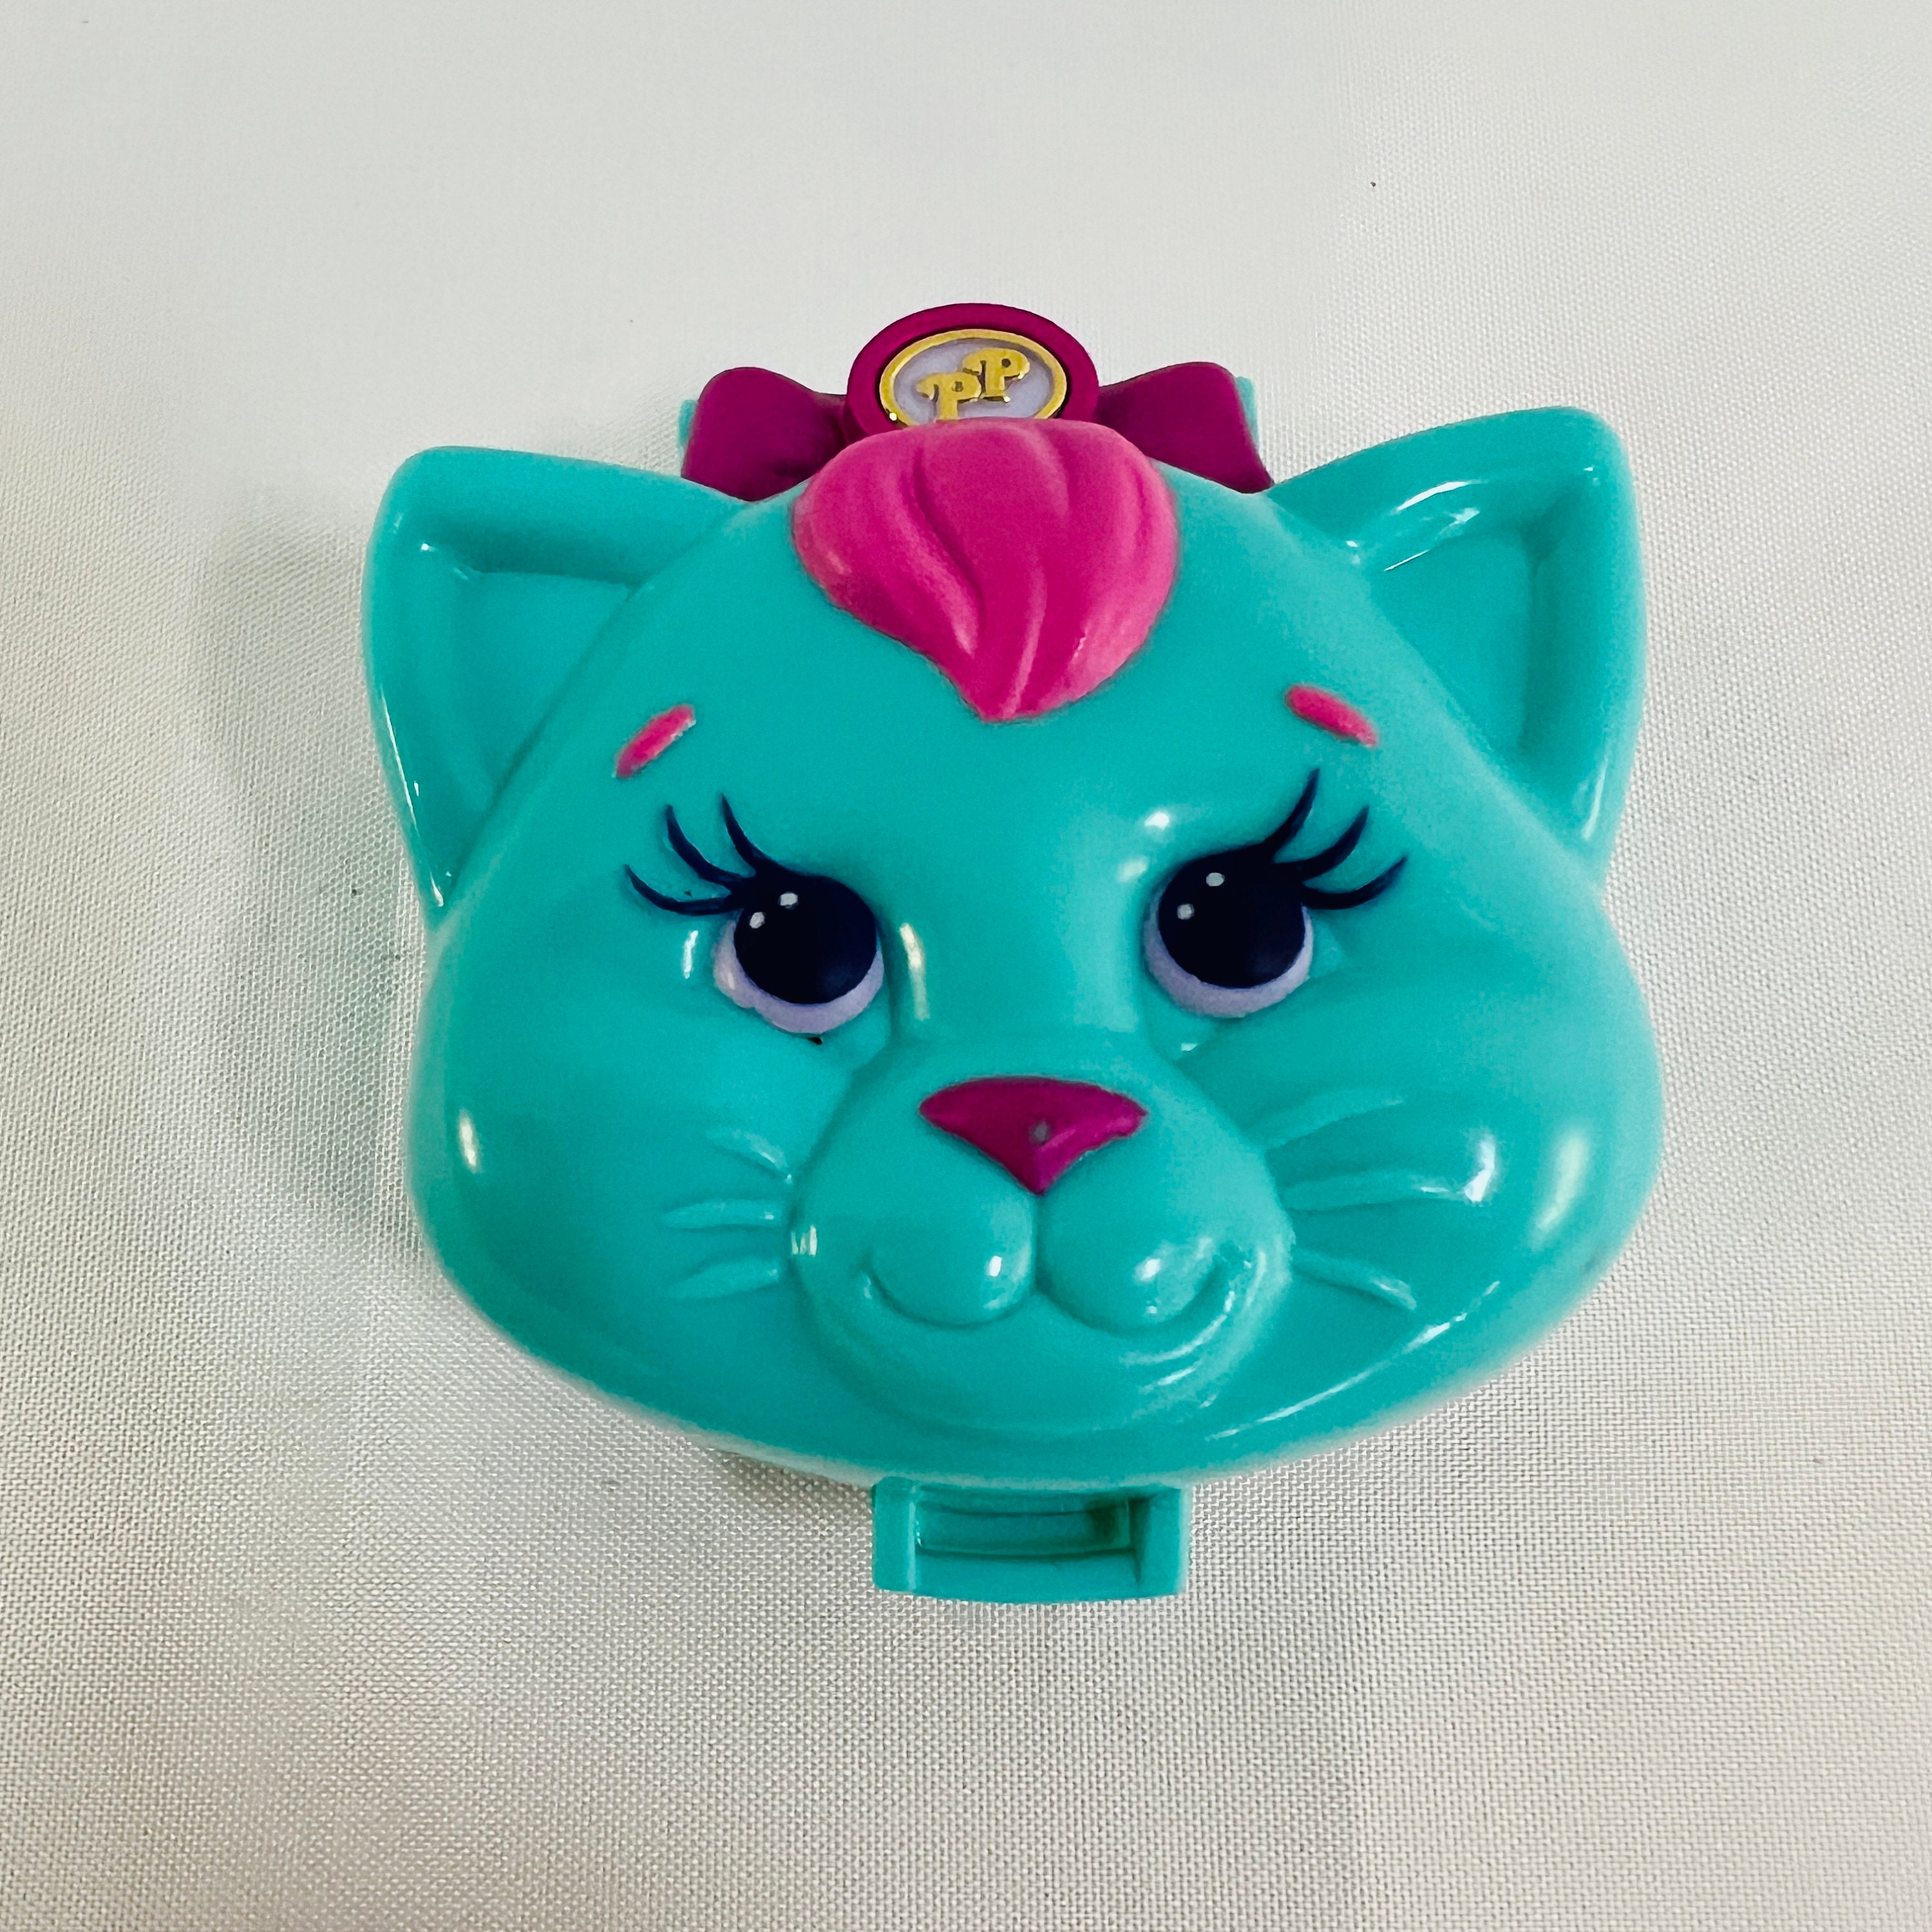 Complete 1993 Polly Pocket Cuddly Kitty Compact Pet Parade Collection,  Vintage Rare Polly Pocket, Complete in Great Condition, Bluebird Toys 